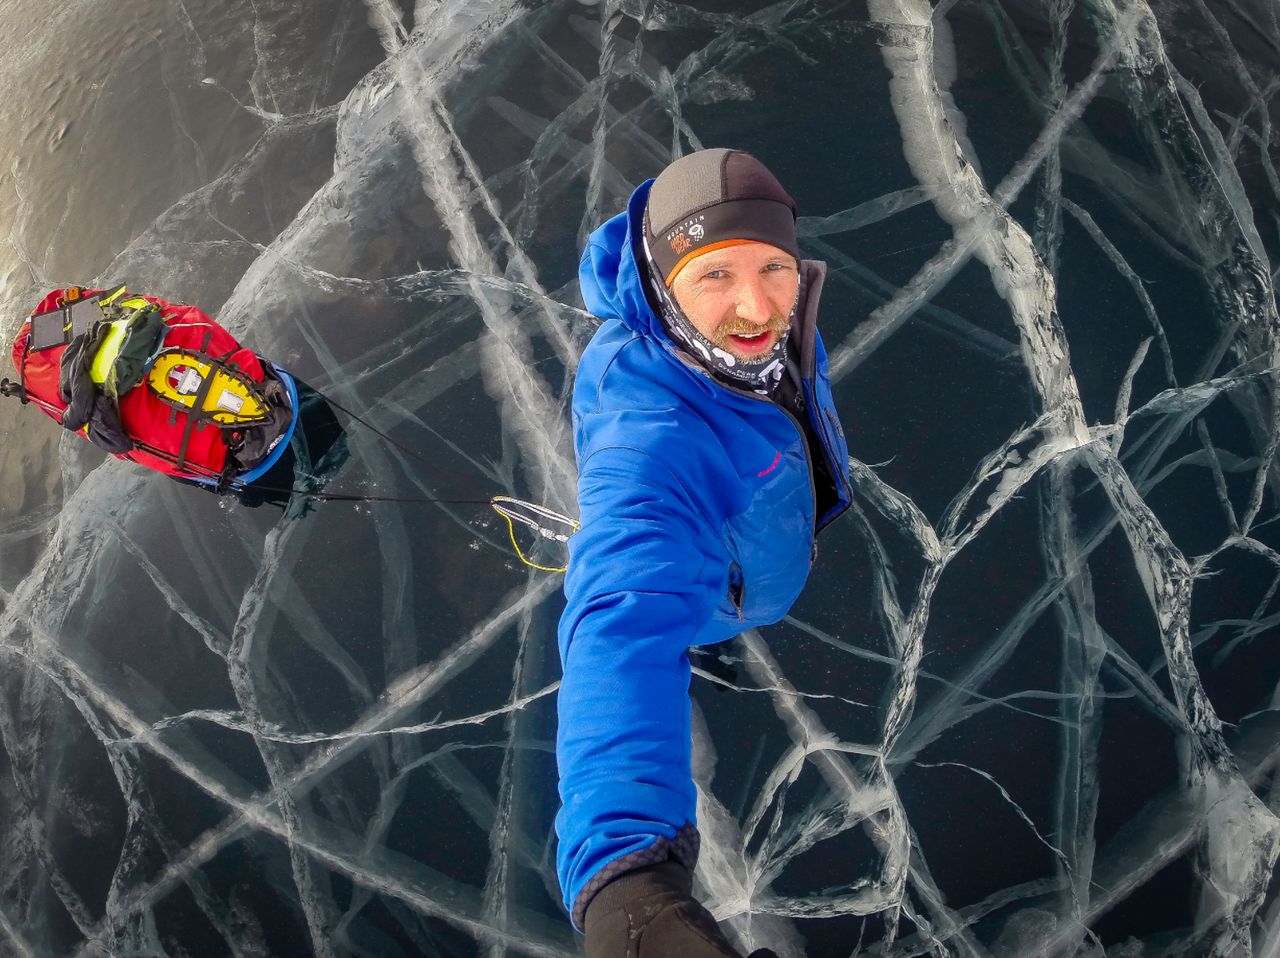 Hennigan during a 440-mile solo traverse of frozen Lake Baikal in Siberia, the oldest and deepest lake in the world